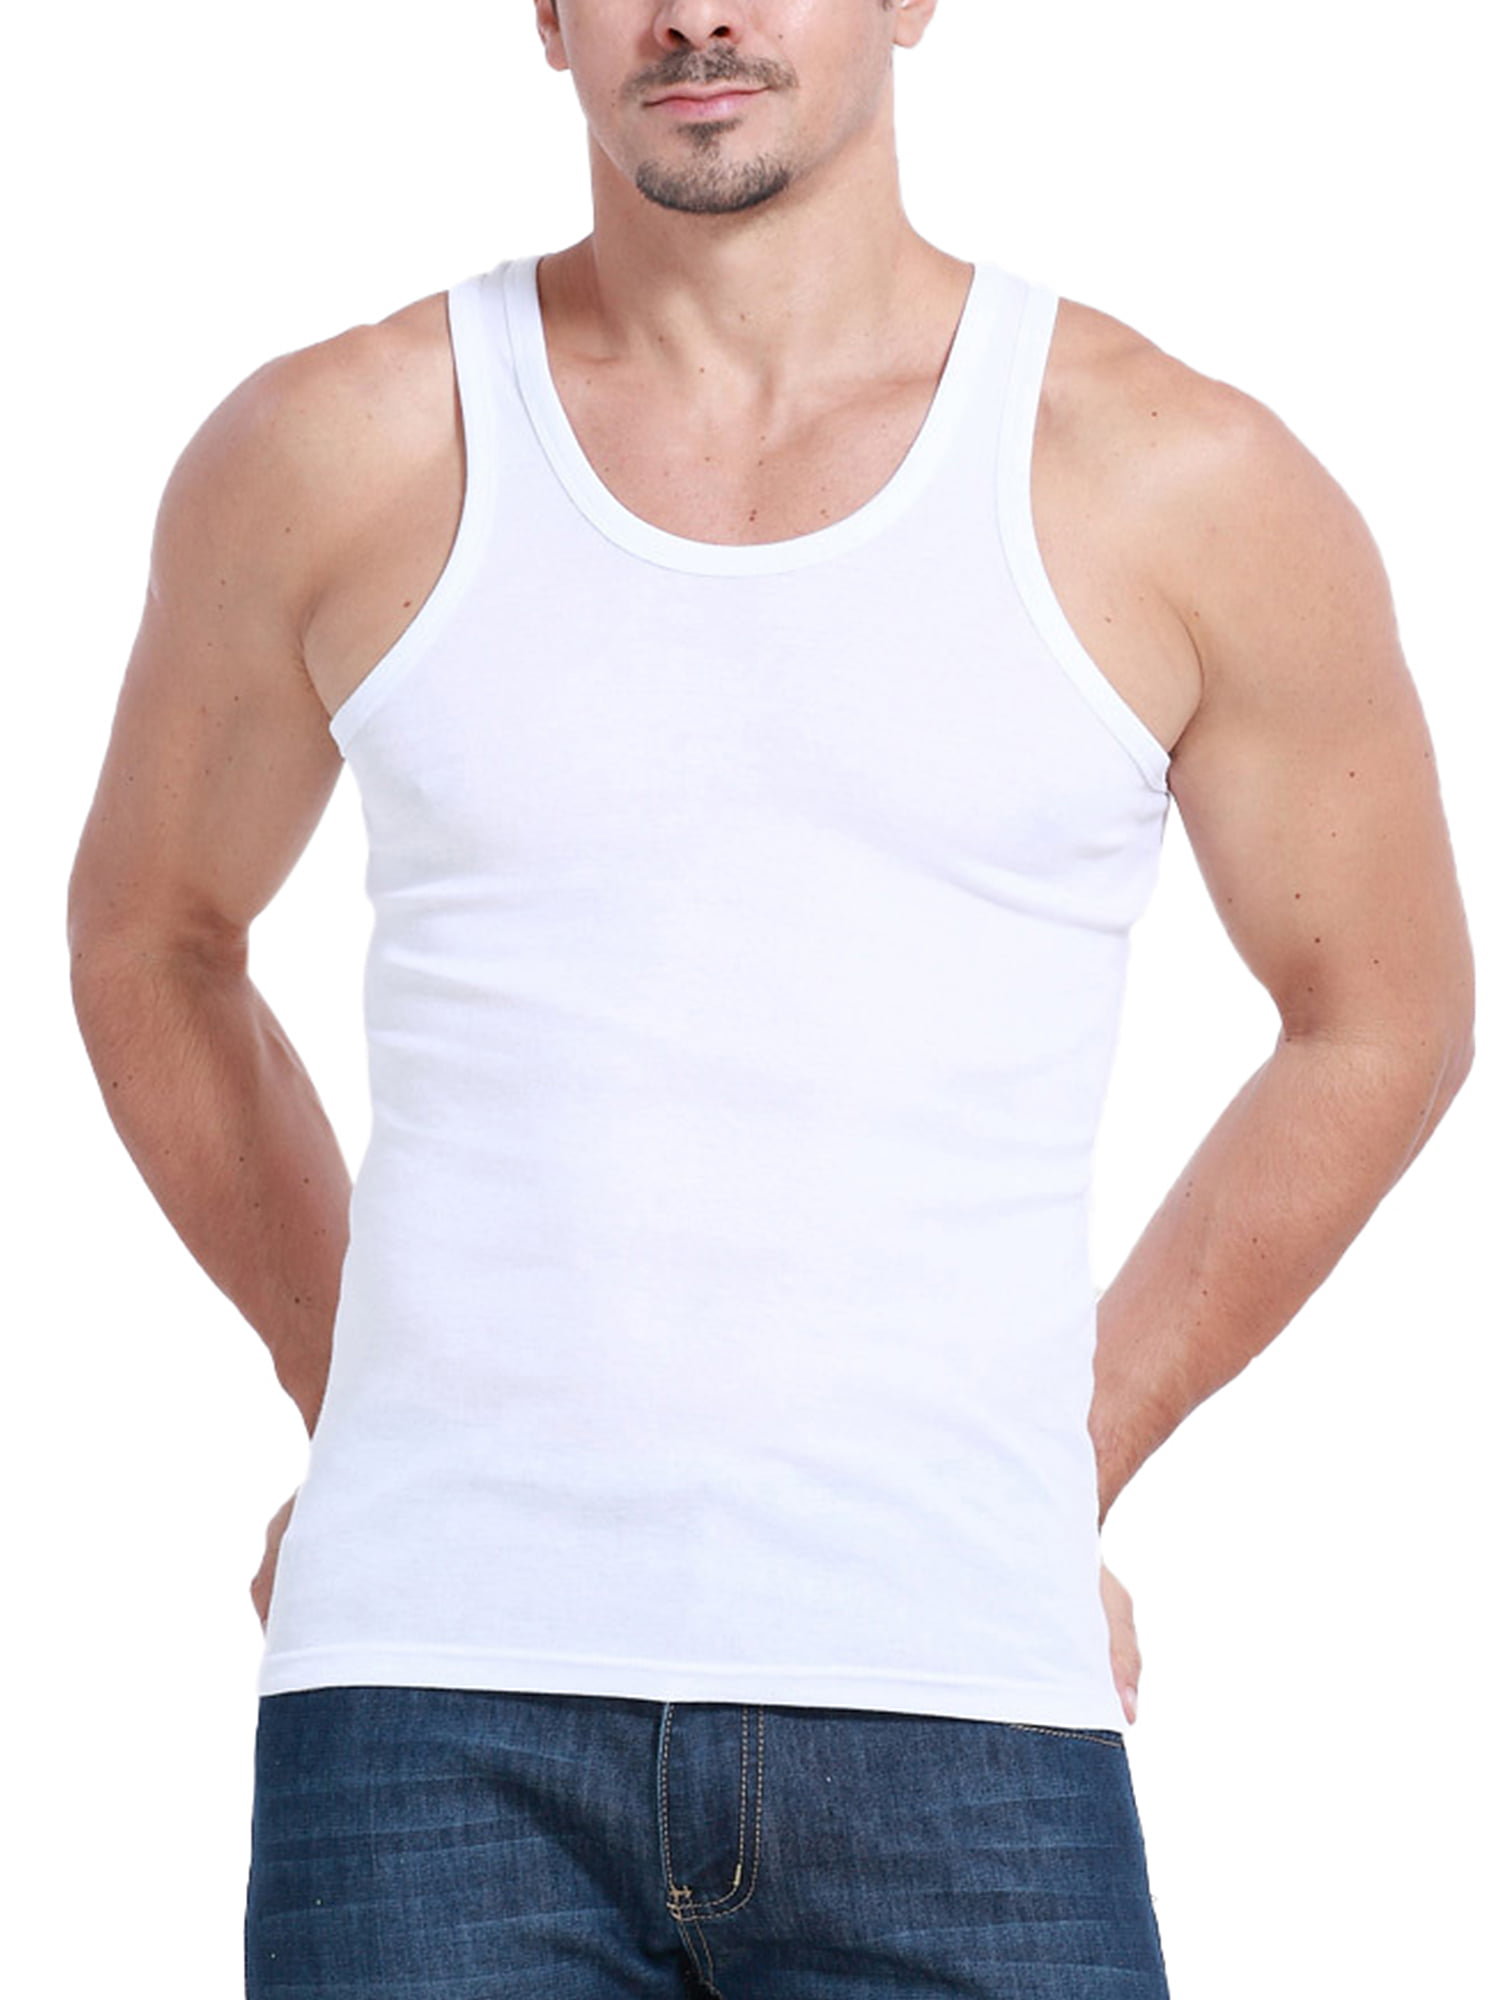 Men's Premium Basic Casual Athletic Sport Jersey Tank Tops Tshirts Work Out Gym